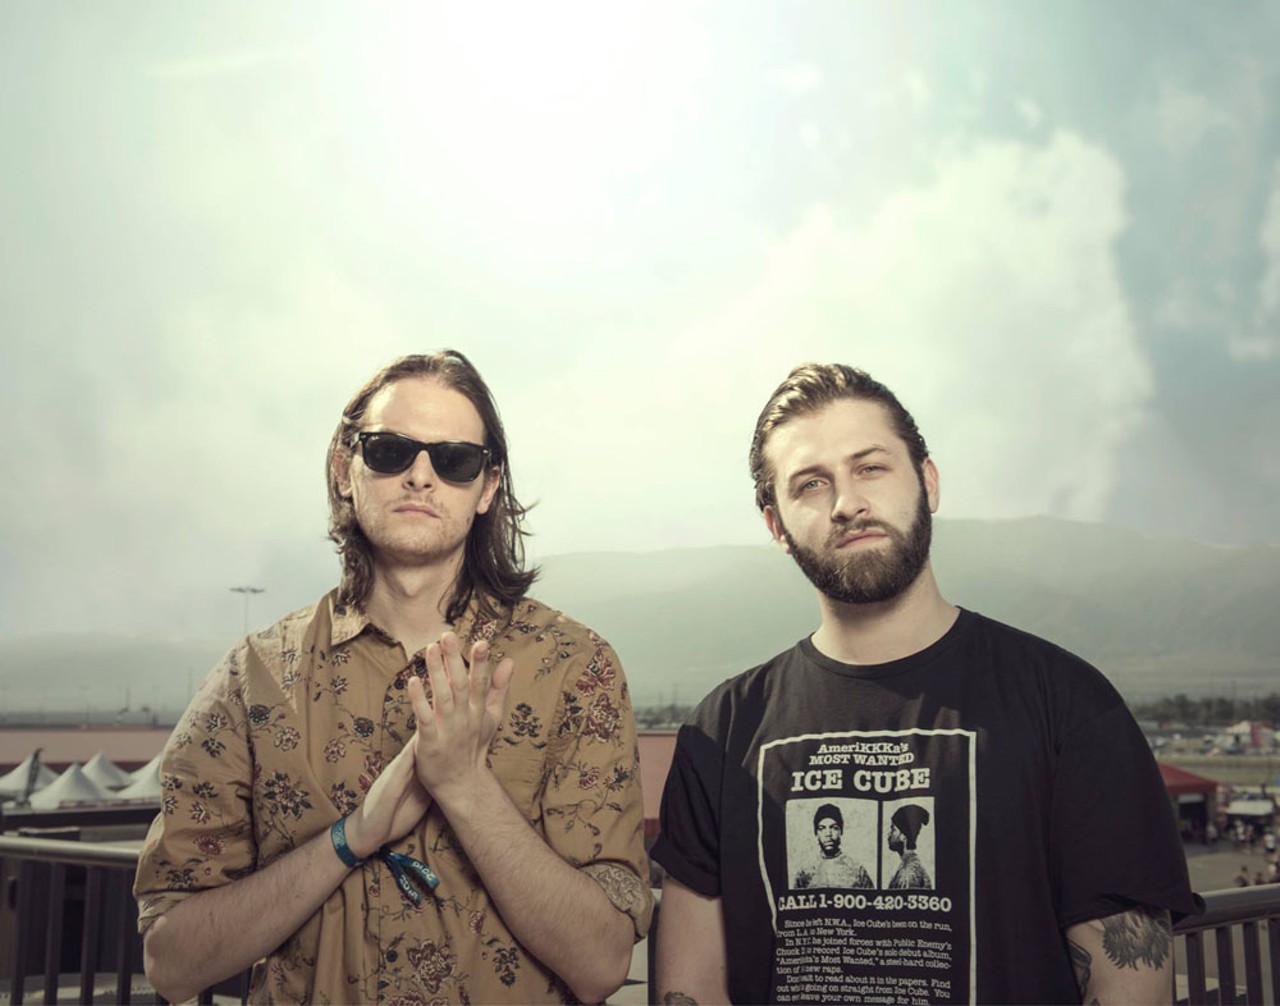 Zeds Dead- Oct 8 @ Masonic Temple
Canadian electronica duo Zeds Dead will grace the Masonic Temple with their unique sound and super rad beats. If you want to dance your ass off, go see this concert. Touring with their newest album Northern Lights, this is going to be a killer show for fans of the genre. 
Doors open at 7 p.m., 500 Temple St., Detroit; Tickets are $30 in advance and $40 at the door.
Photo via Facebook